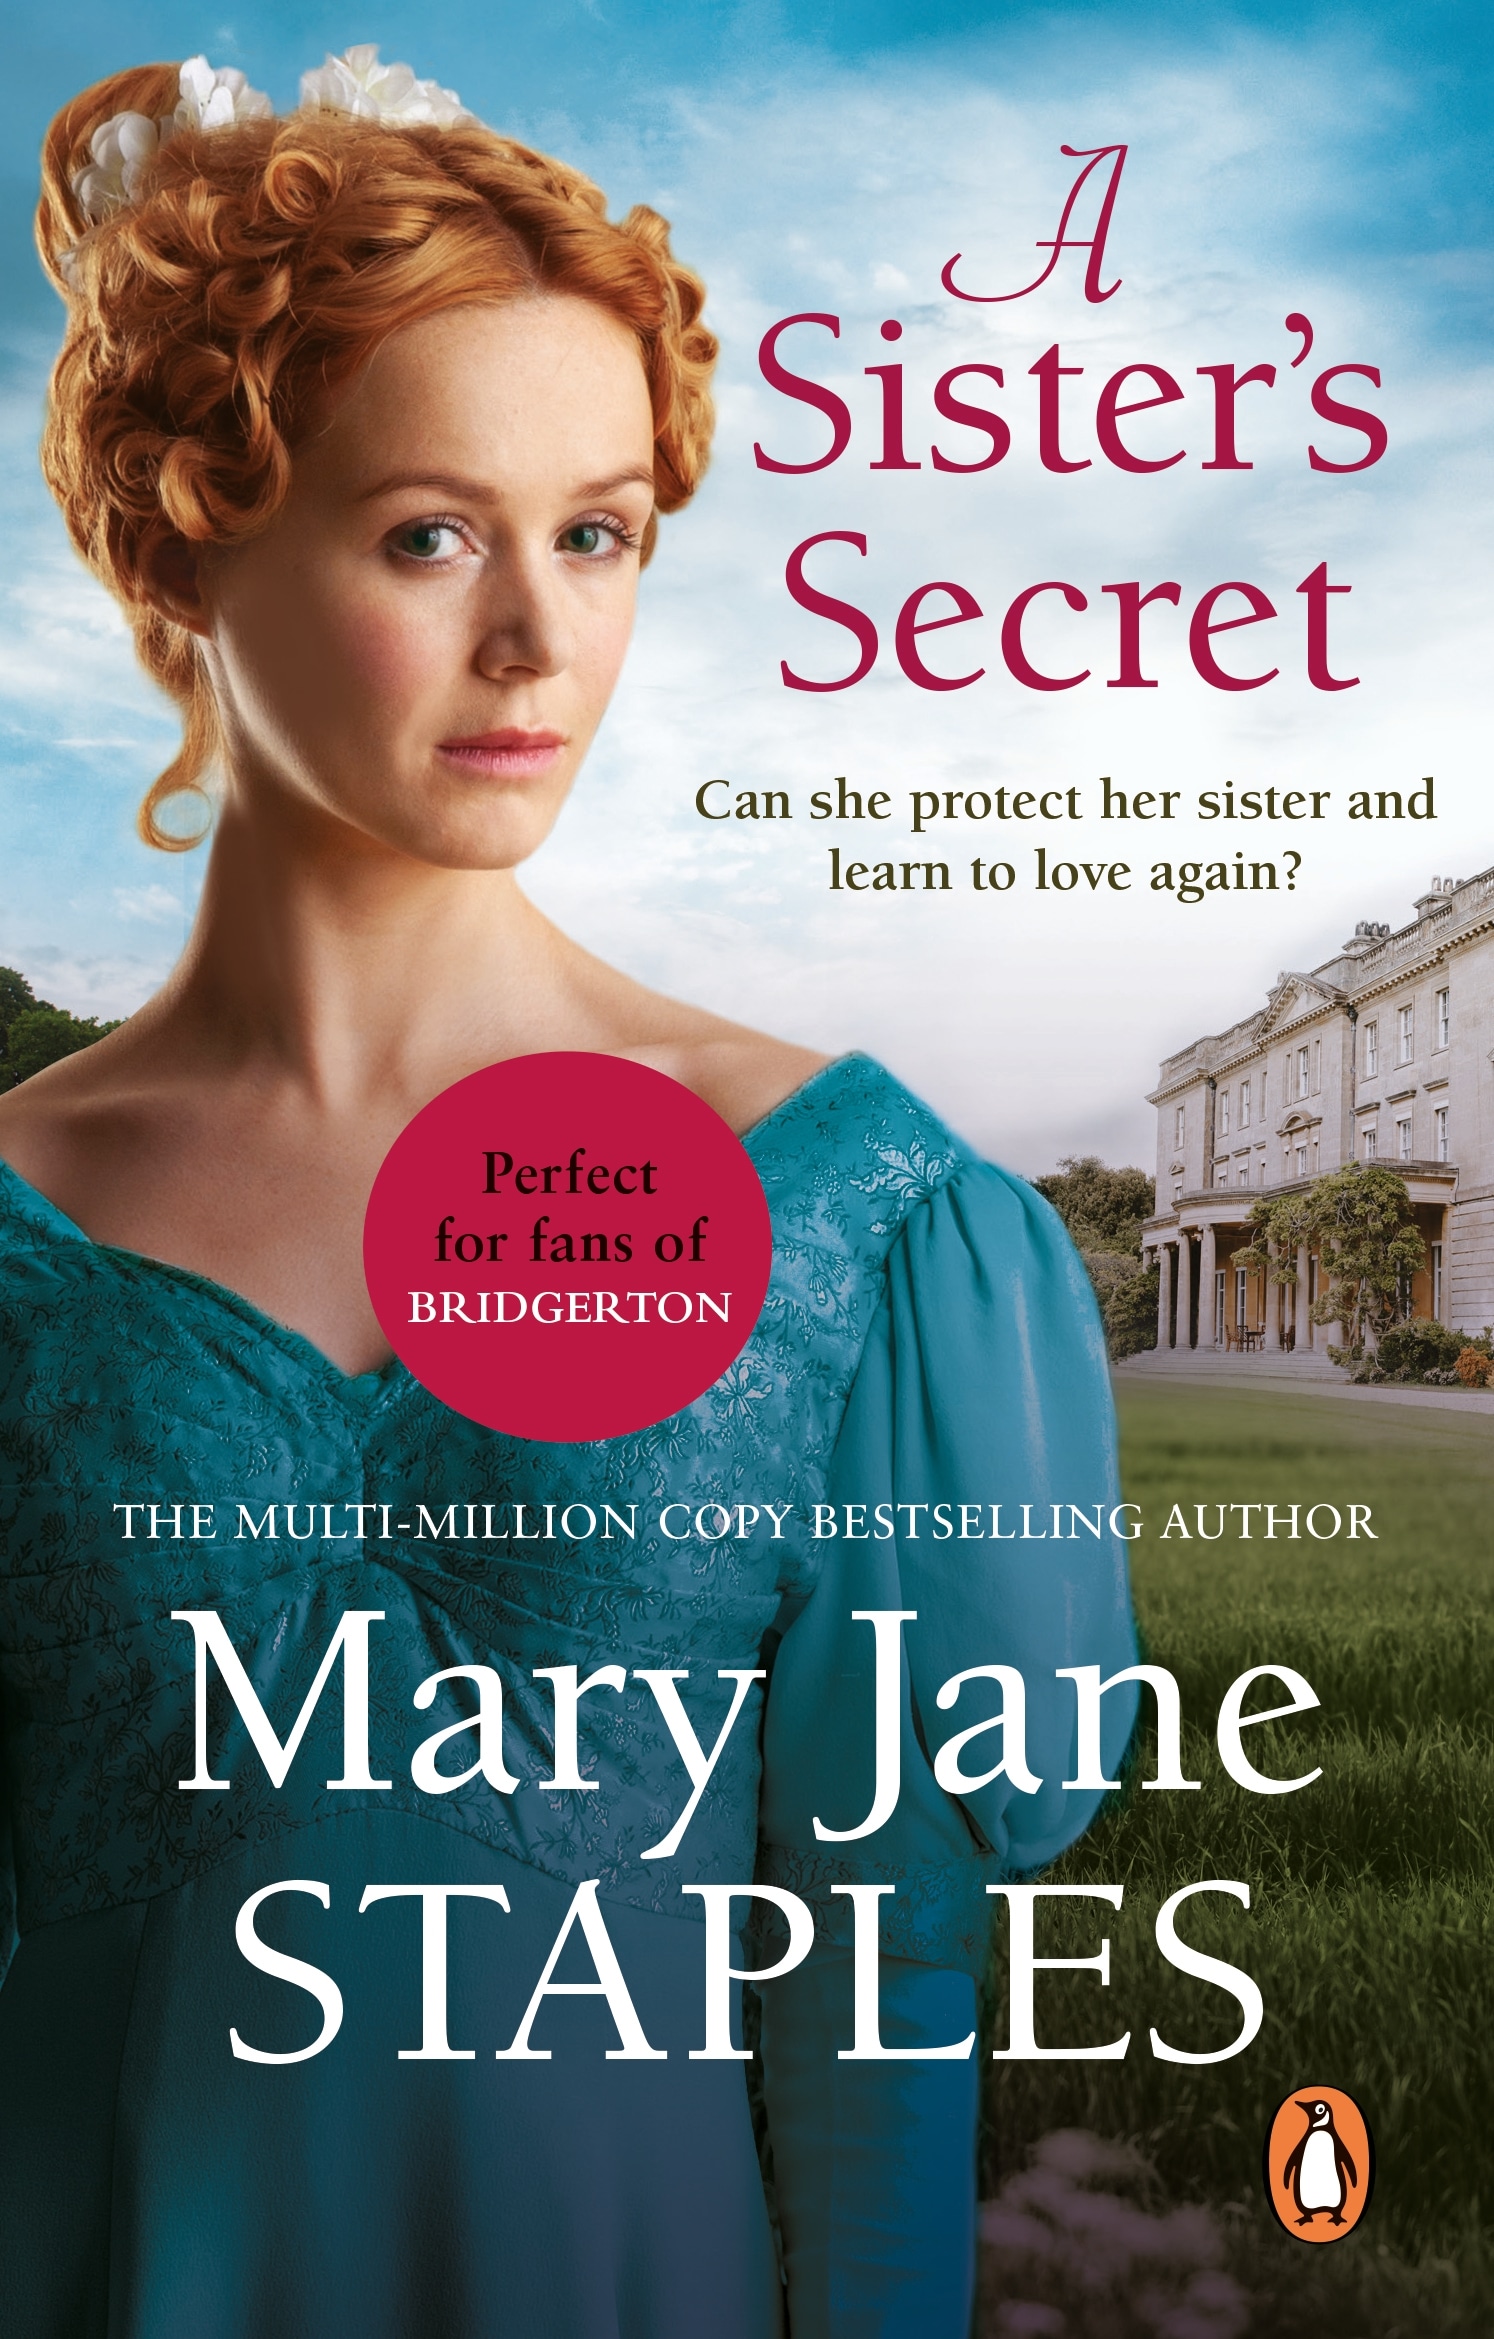 Book “A Sister's Secret” by Mary Jane Staples — June 24, 2021